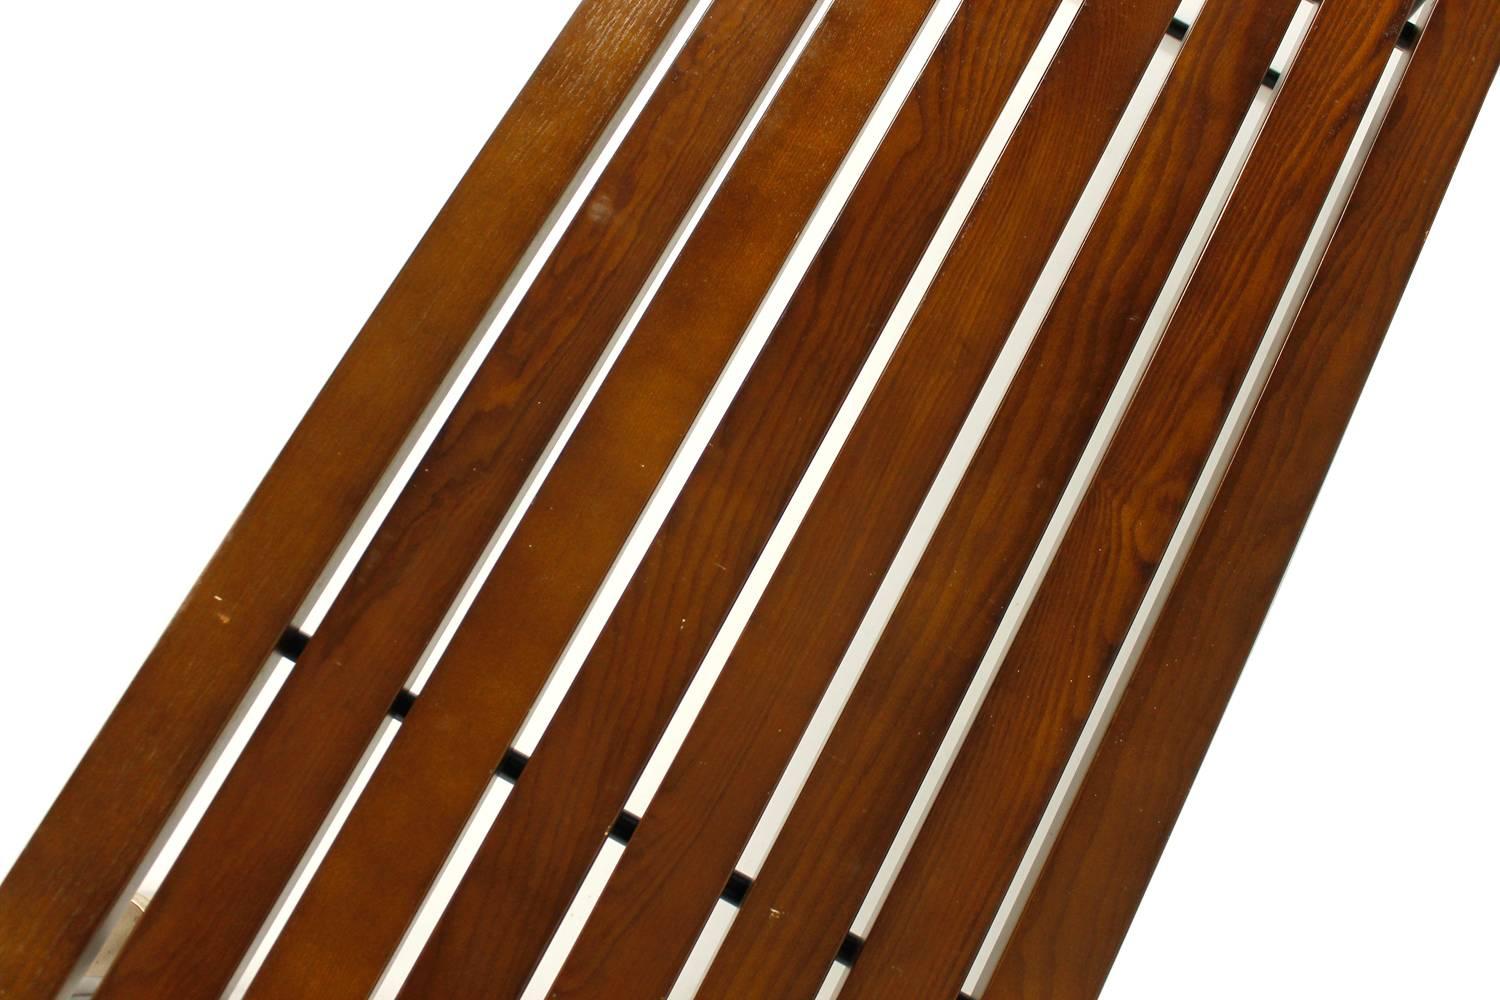 Mid-20th Century Mid-Century Modern Bench Attributed to Harry Bertoia, Dark Stained Beech Wood